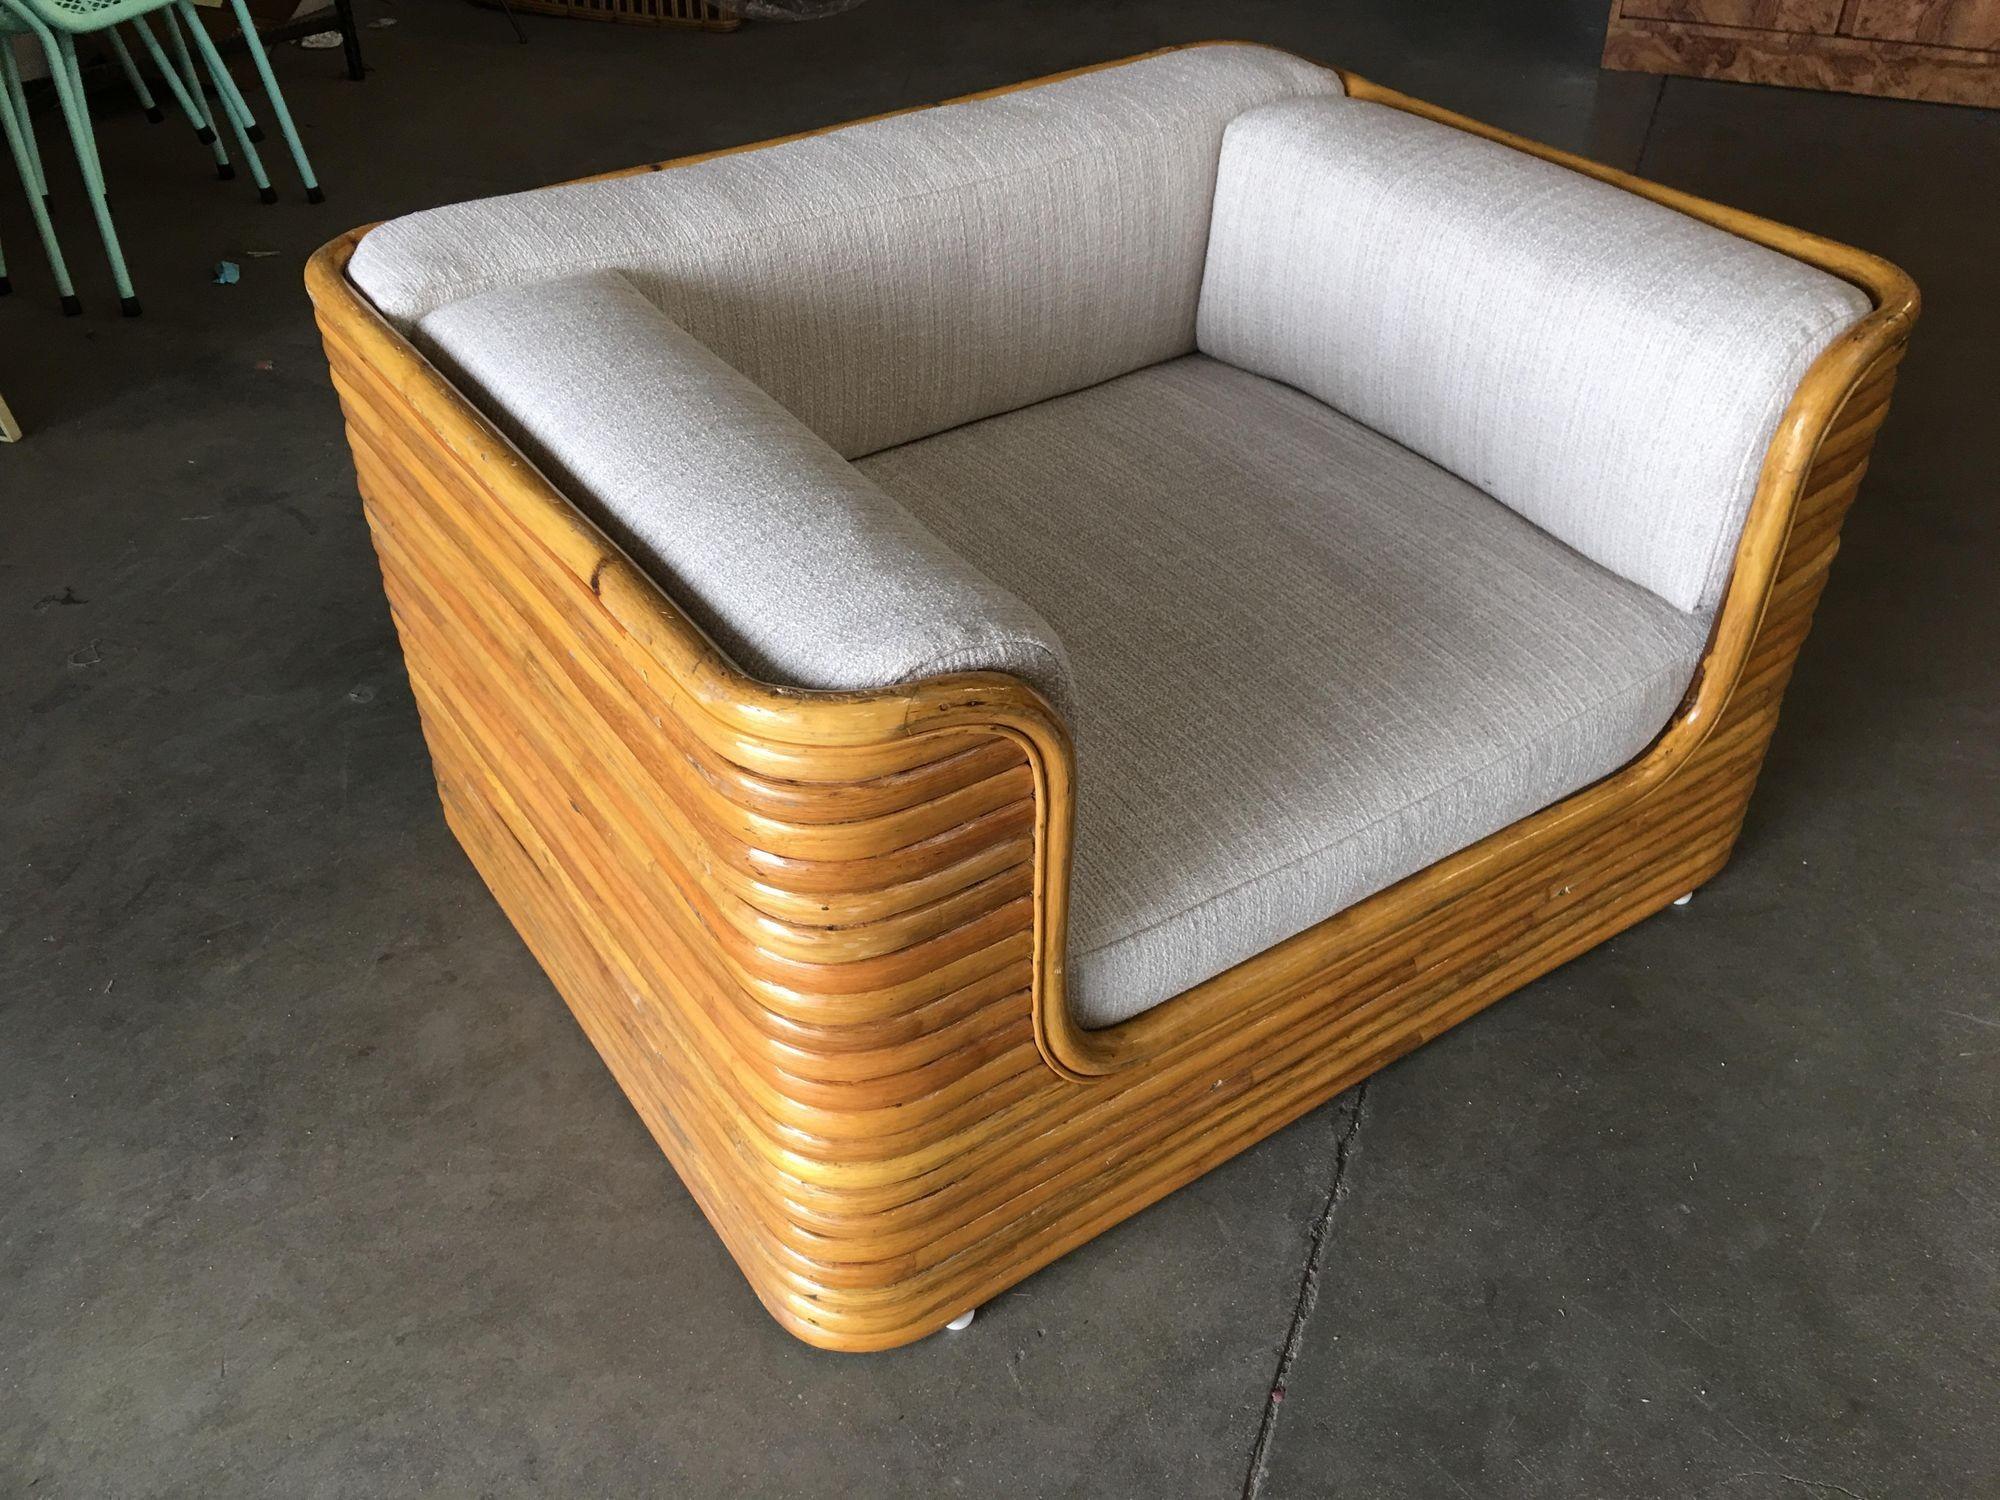 Rare Vintage 1970s full stacked rattan lowboy lounge chair featuring a cubist design made entirely of stacked steam-bent pole rattan with rattan along the borders.

The chair features a low 12